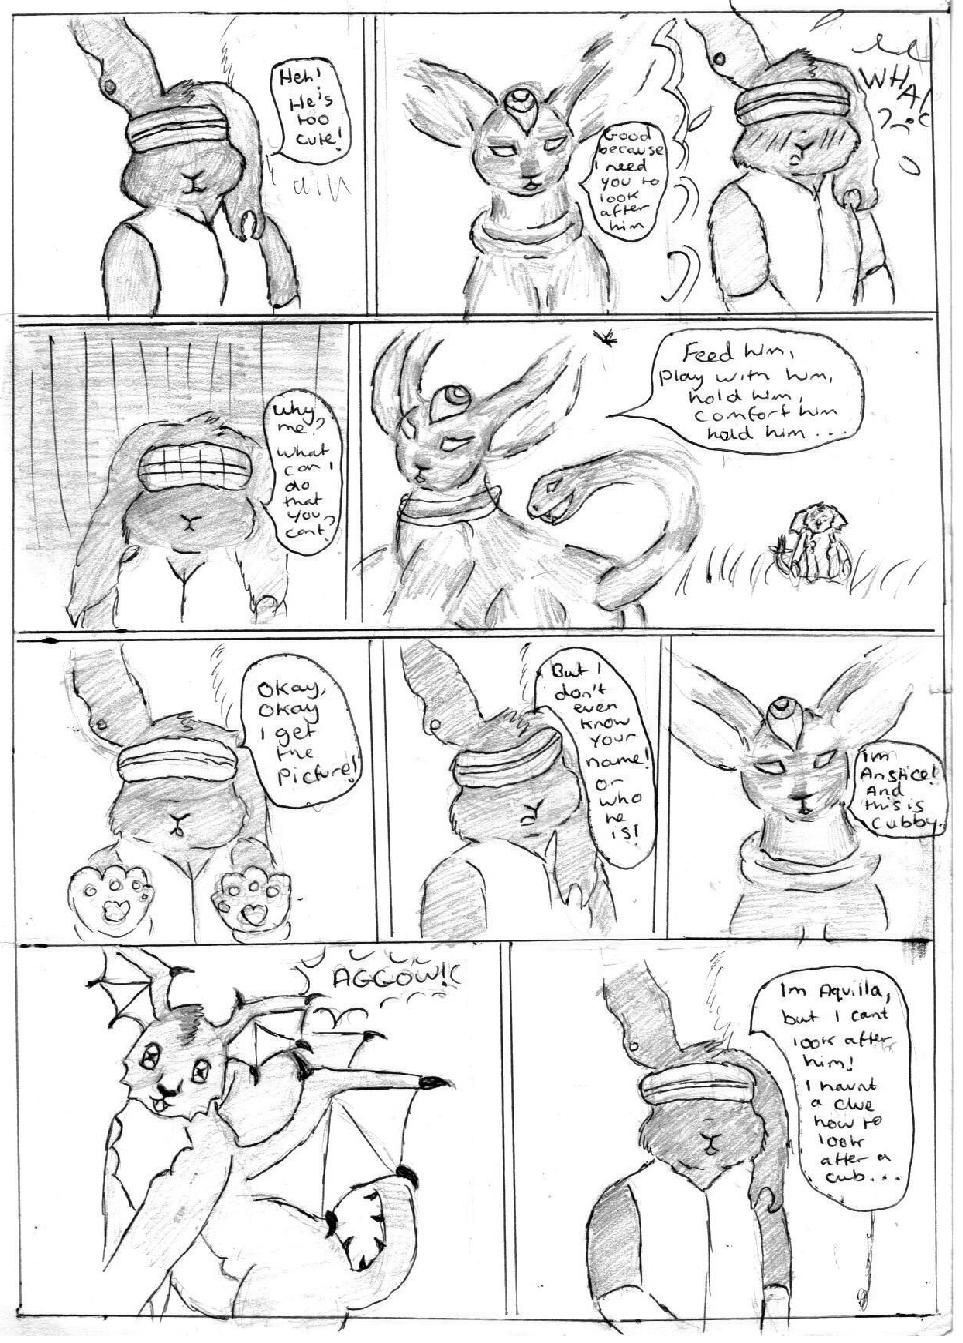 FB's The Dark skies of sorrow: page 12 by Fluffybunny